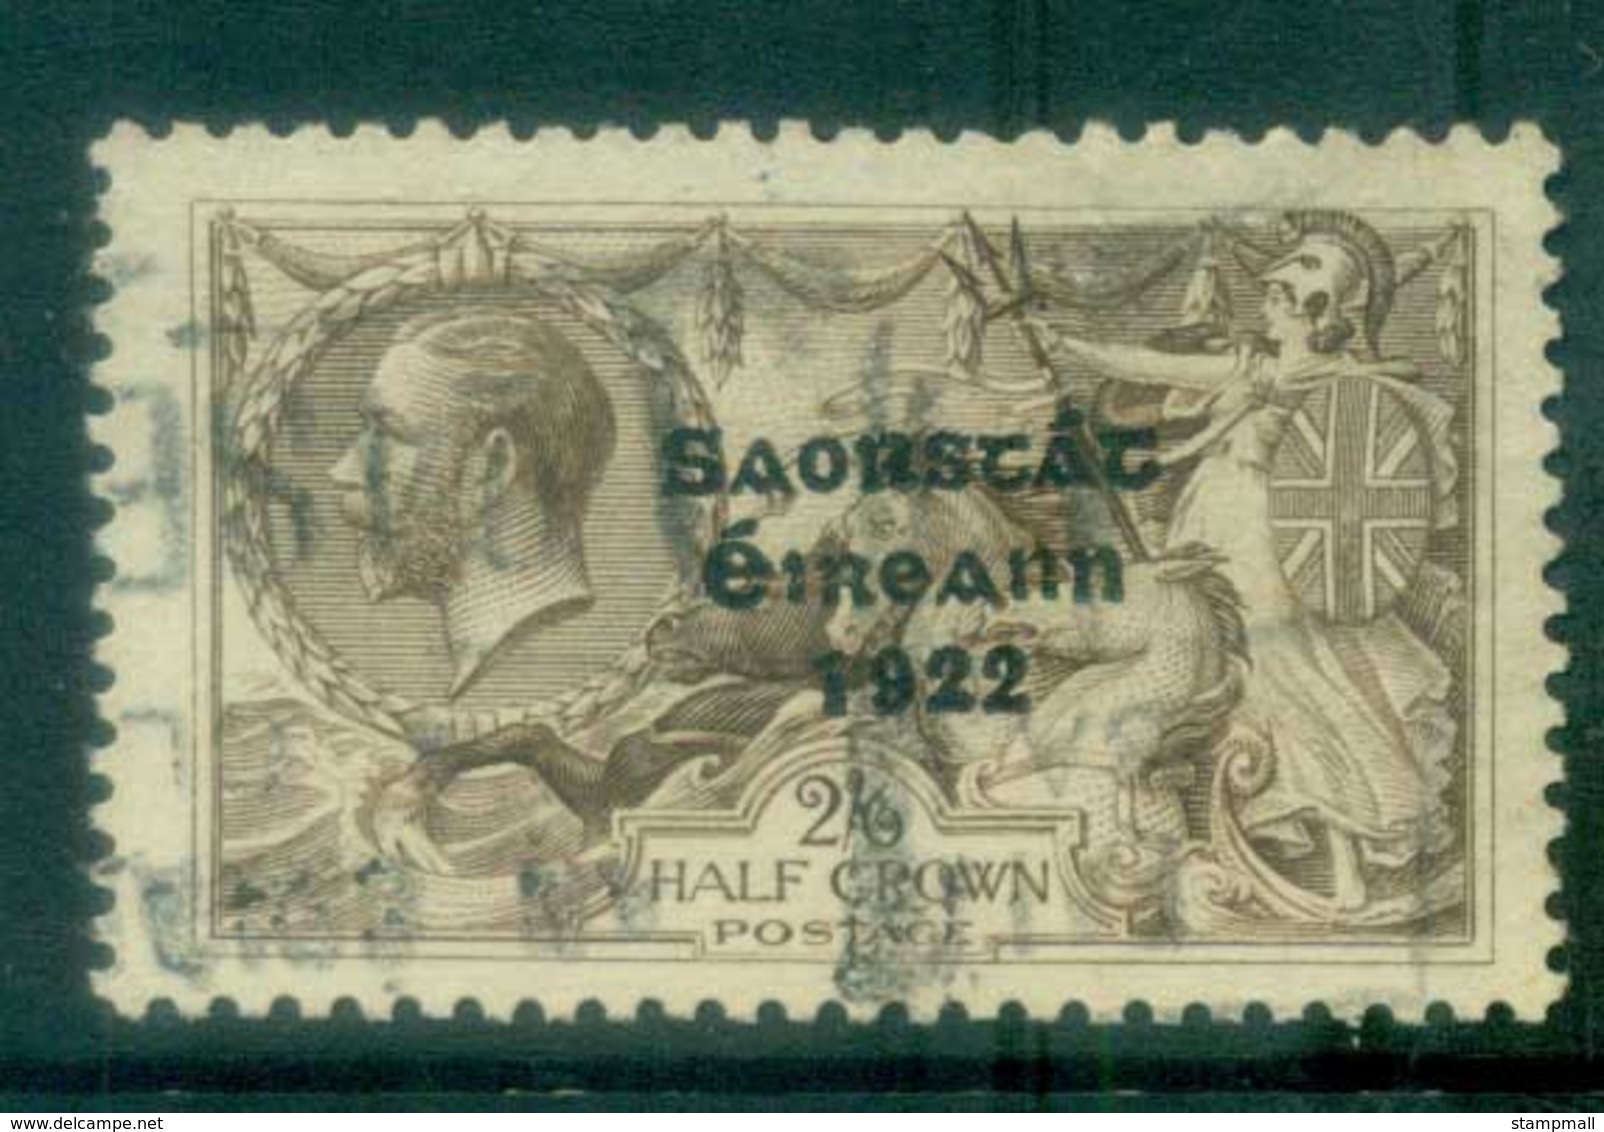 Ireland 1927-28 2/6d Chocolate -brown Seahorse Provisional Opt. Blue-Blk 3 Line Wide Date FU Lot78517 - Used Stamps